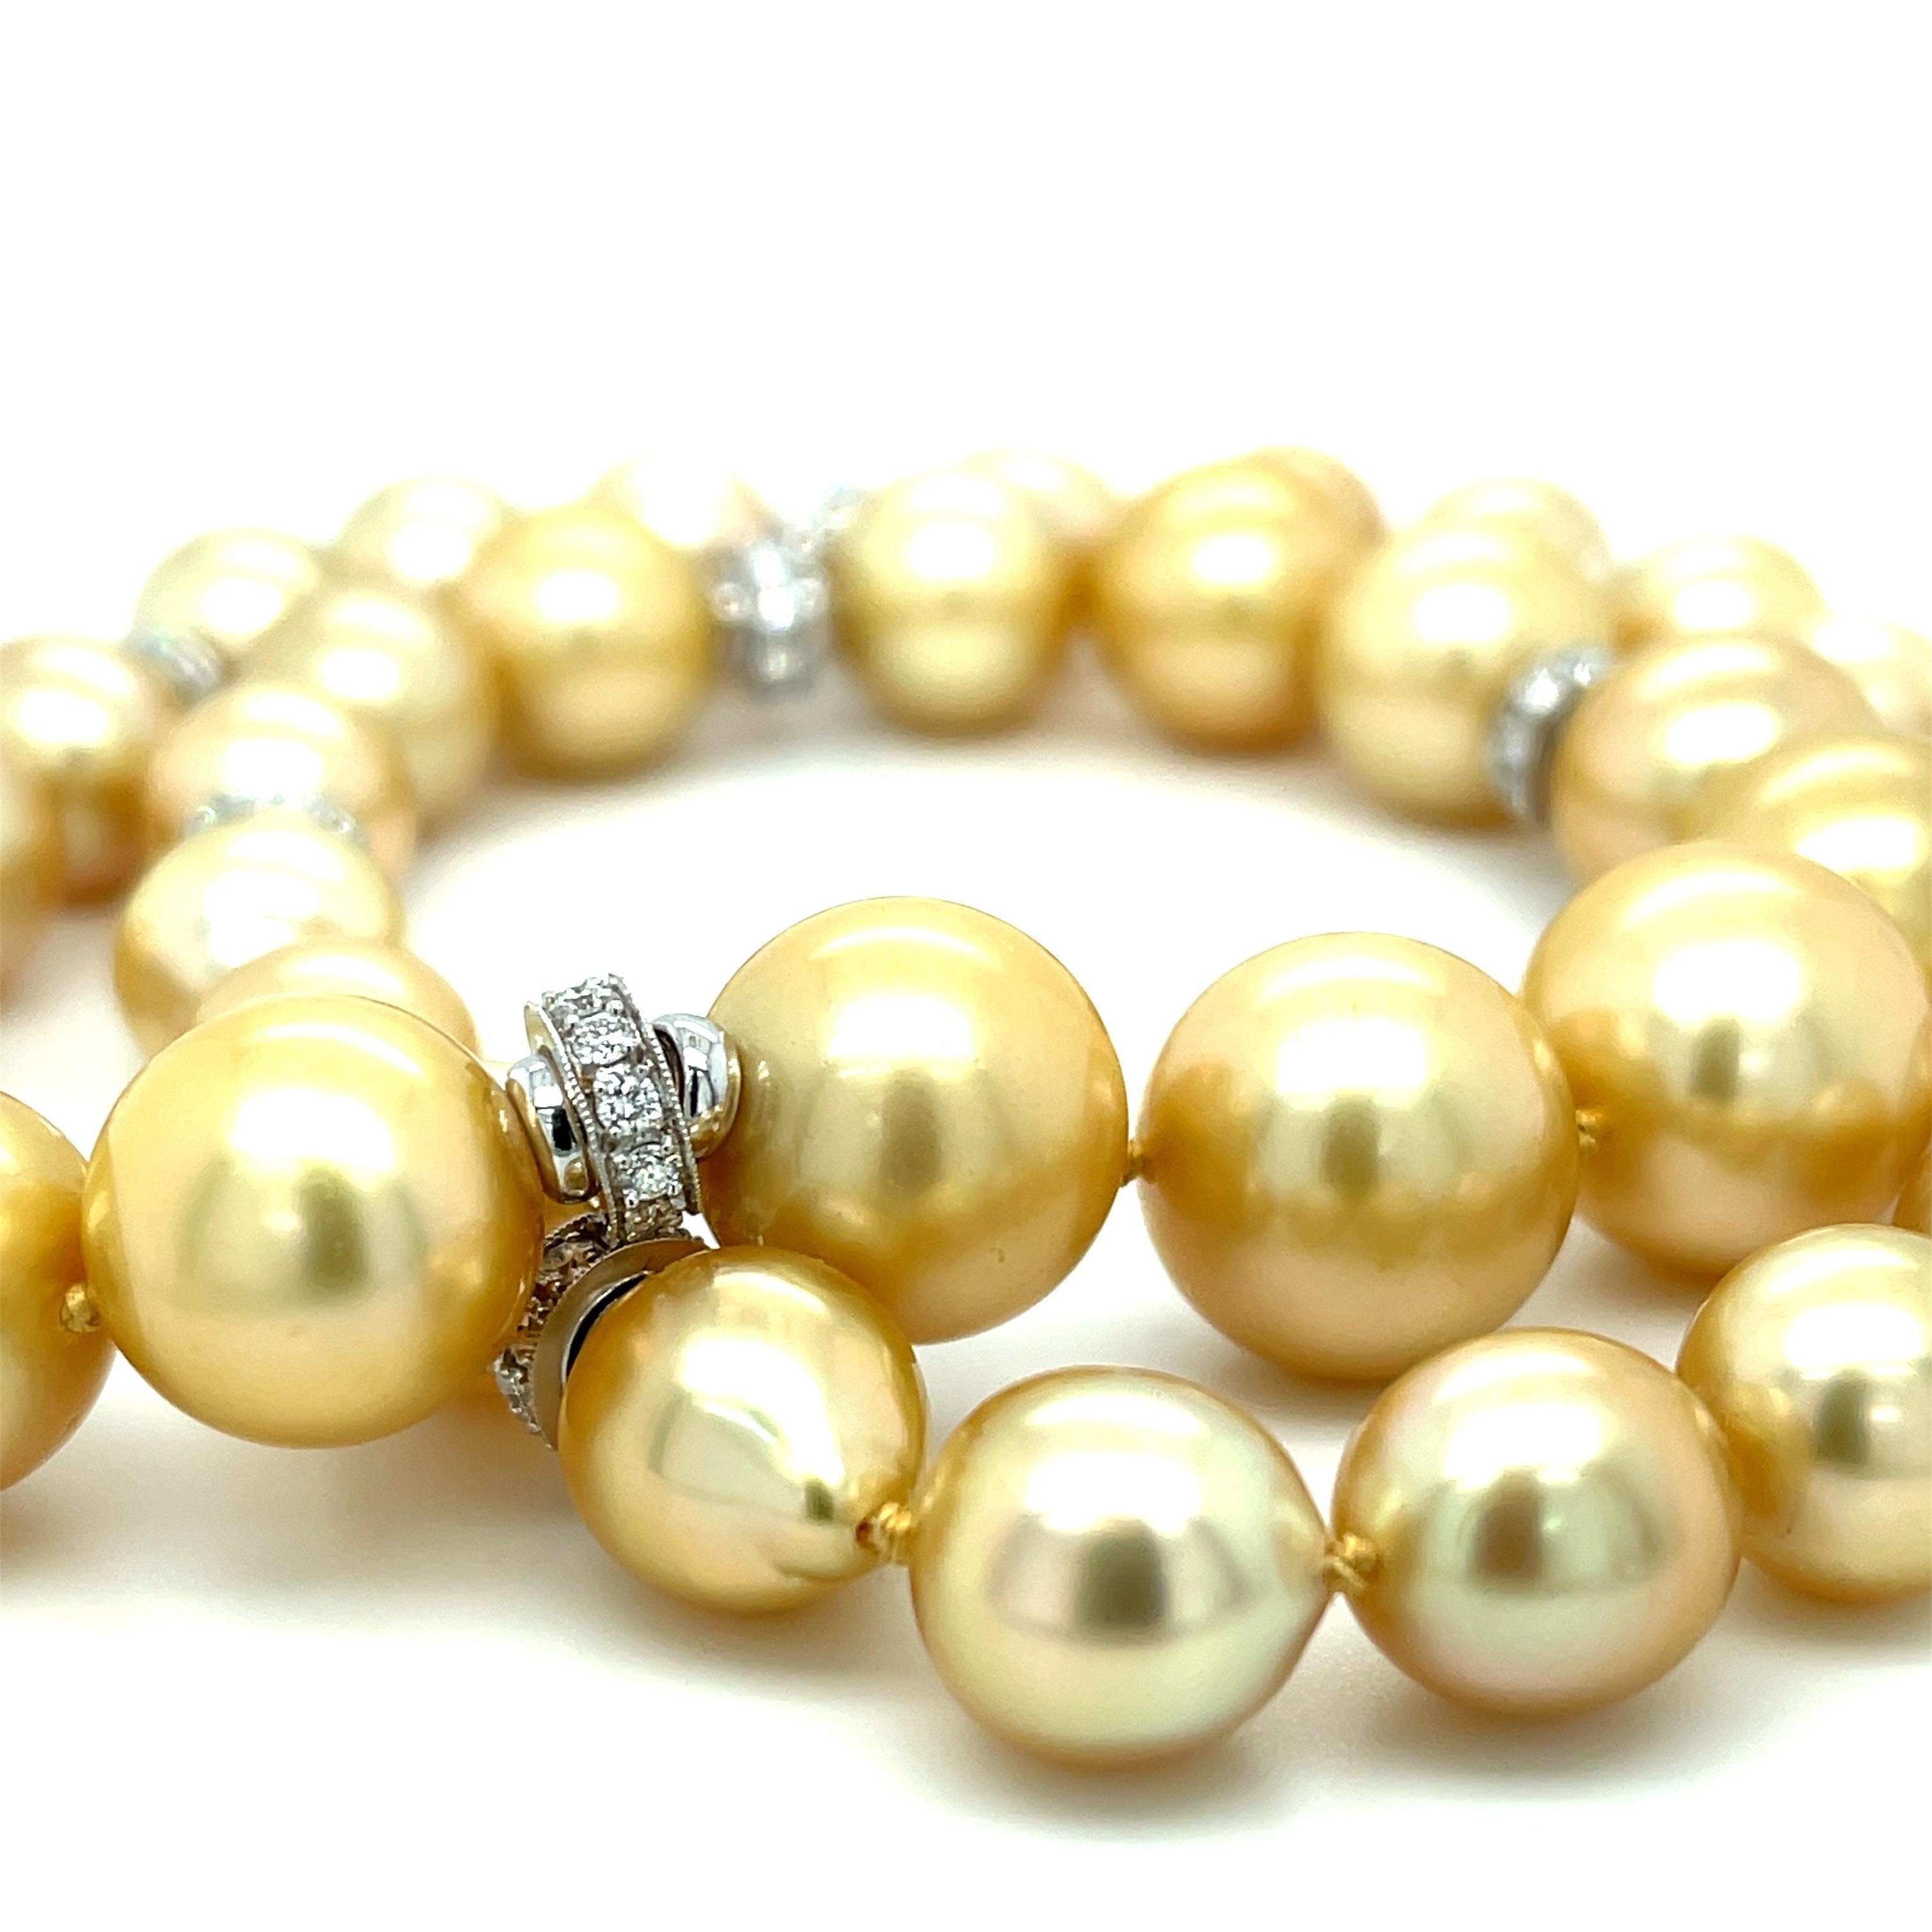 Artisan Golden South Sea Pearl Necklace, 18 Inches with 14k and 18k Accents, 9.6 - 13mm For Sale